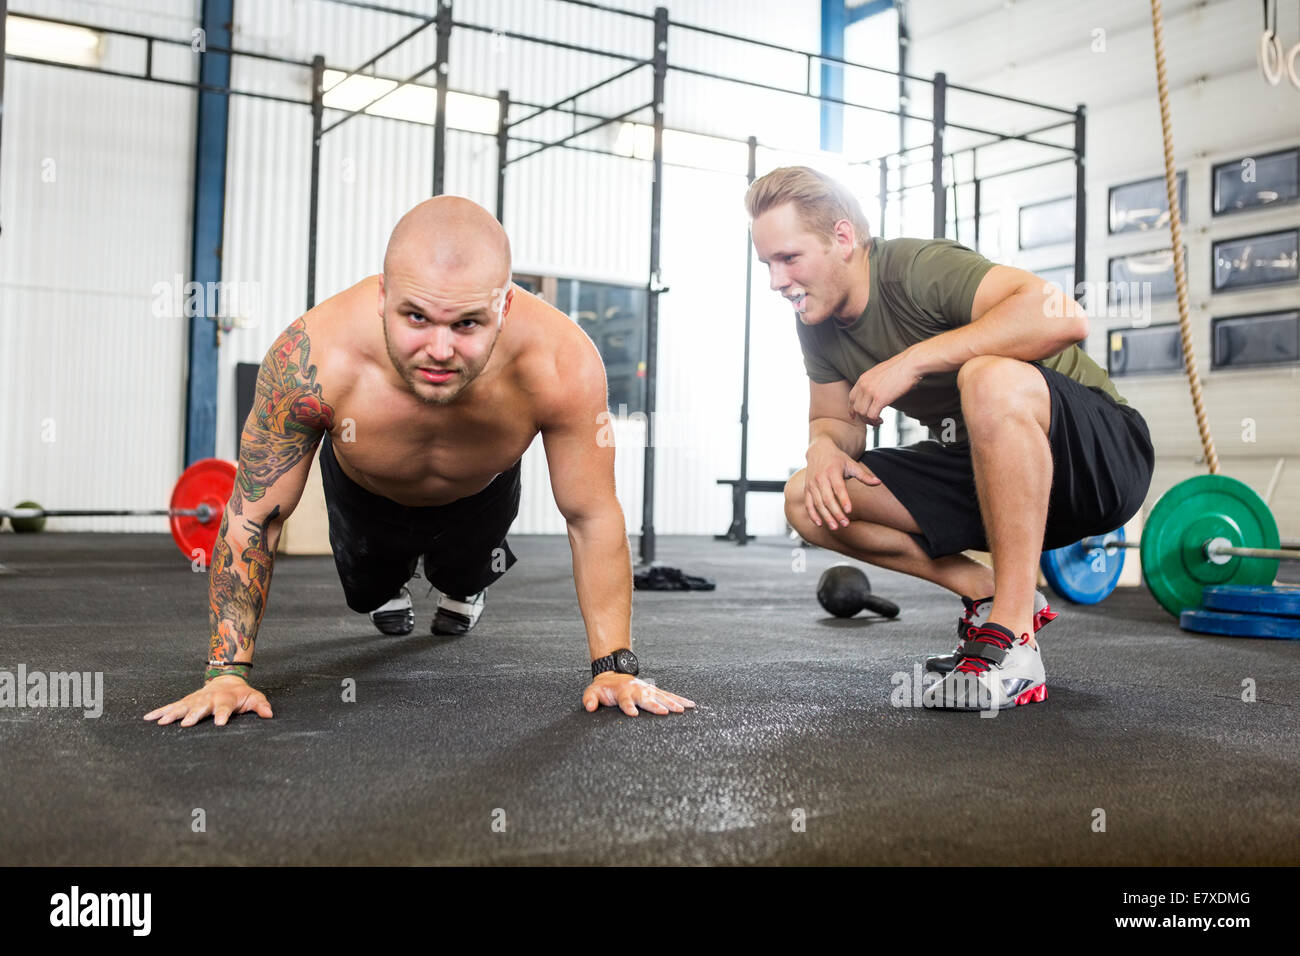 Trainer Assisting Man In Doing Pushups Stock Photo